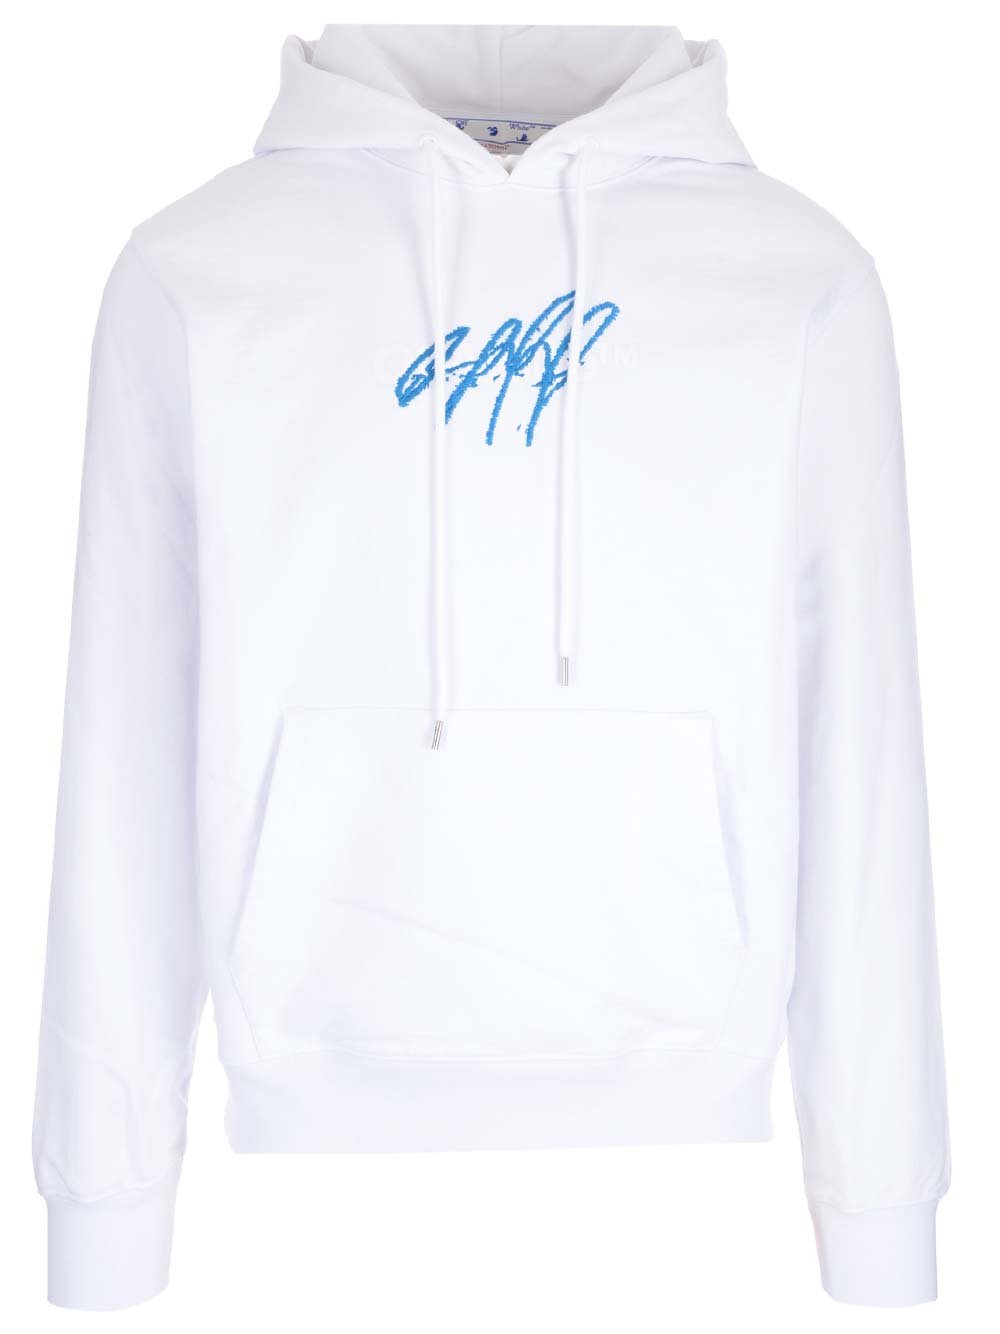 Off-White Logo Embroidered Drawstring Hoodie